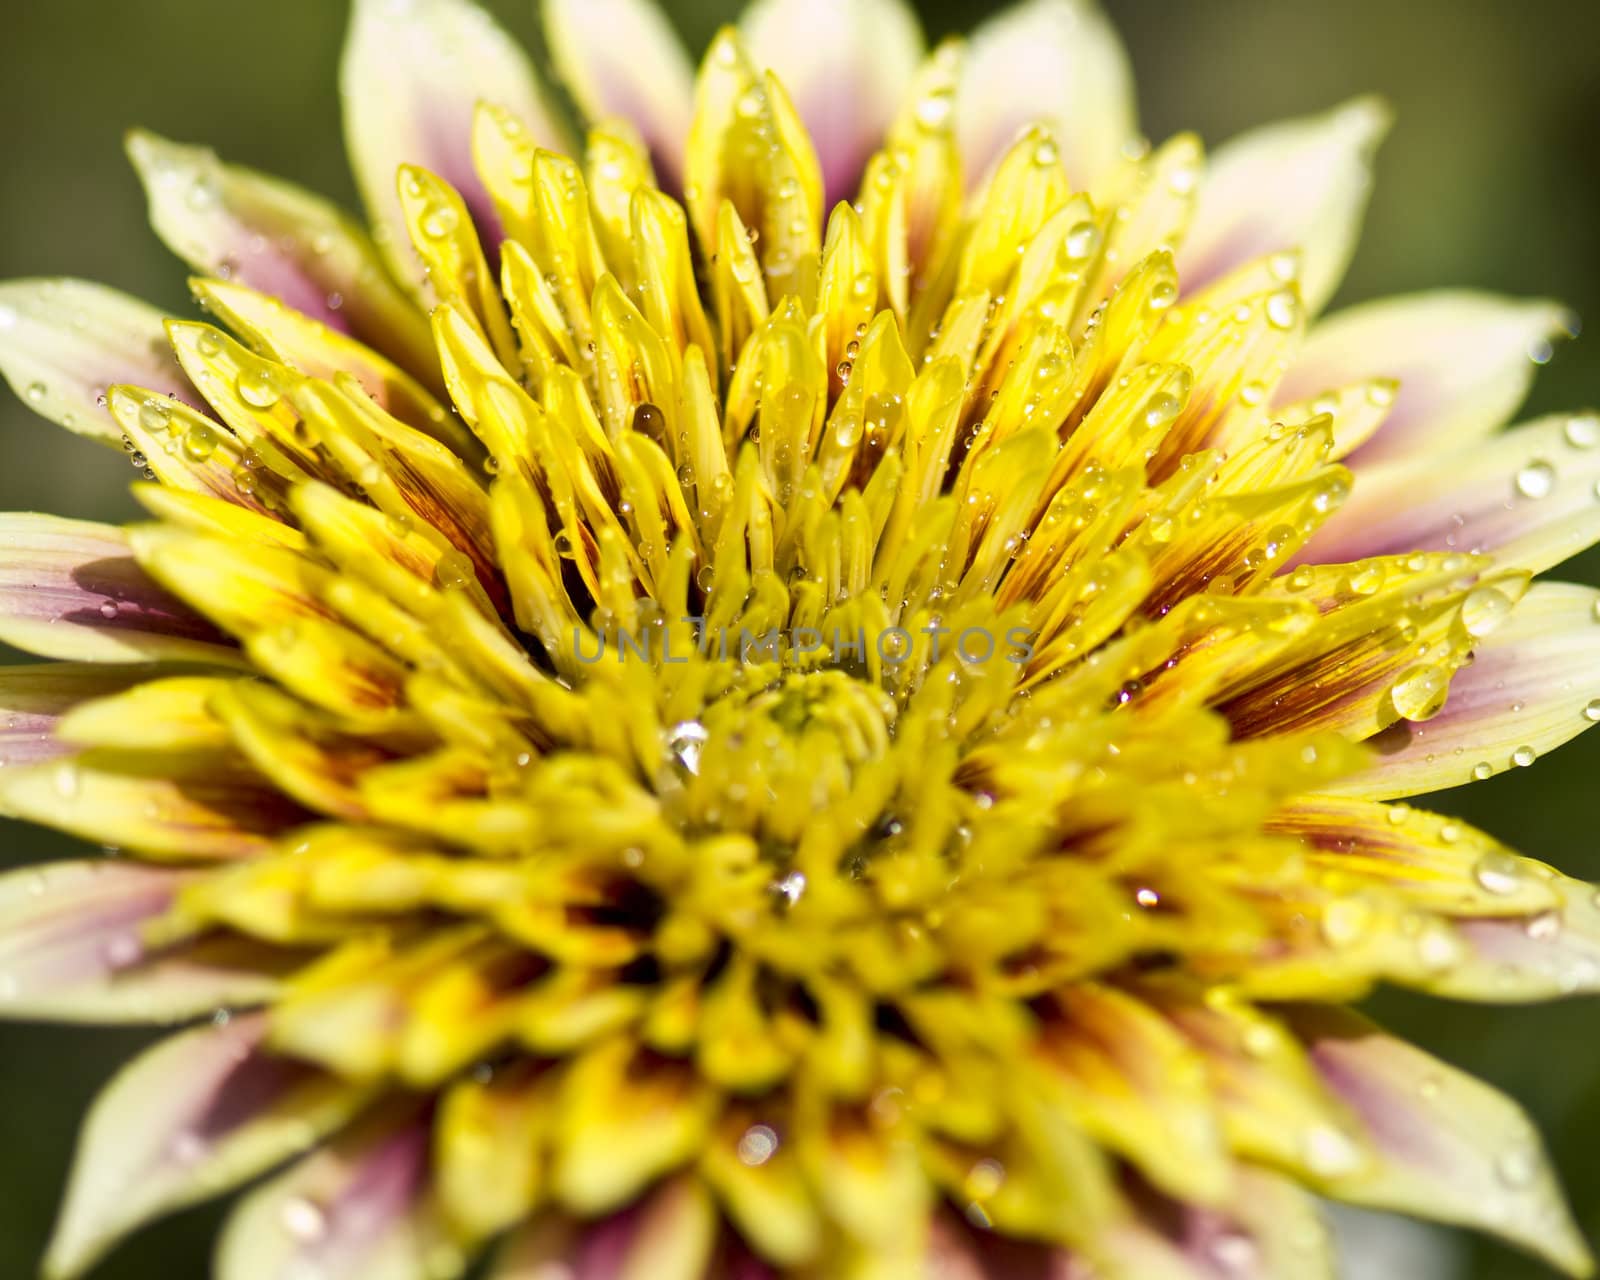 Yellow flower covered in droplets, filling the whole frame